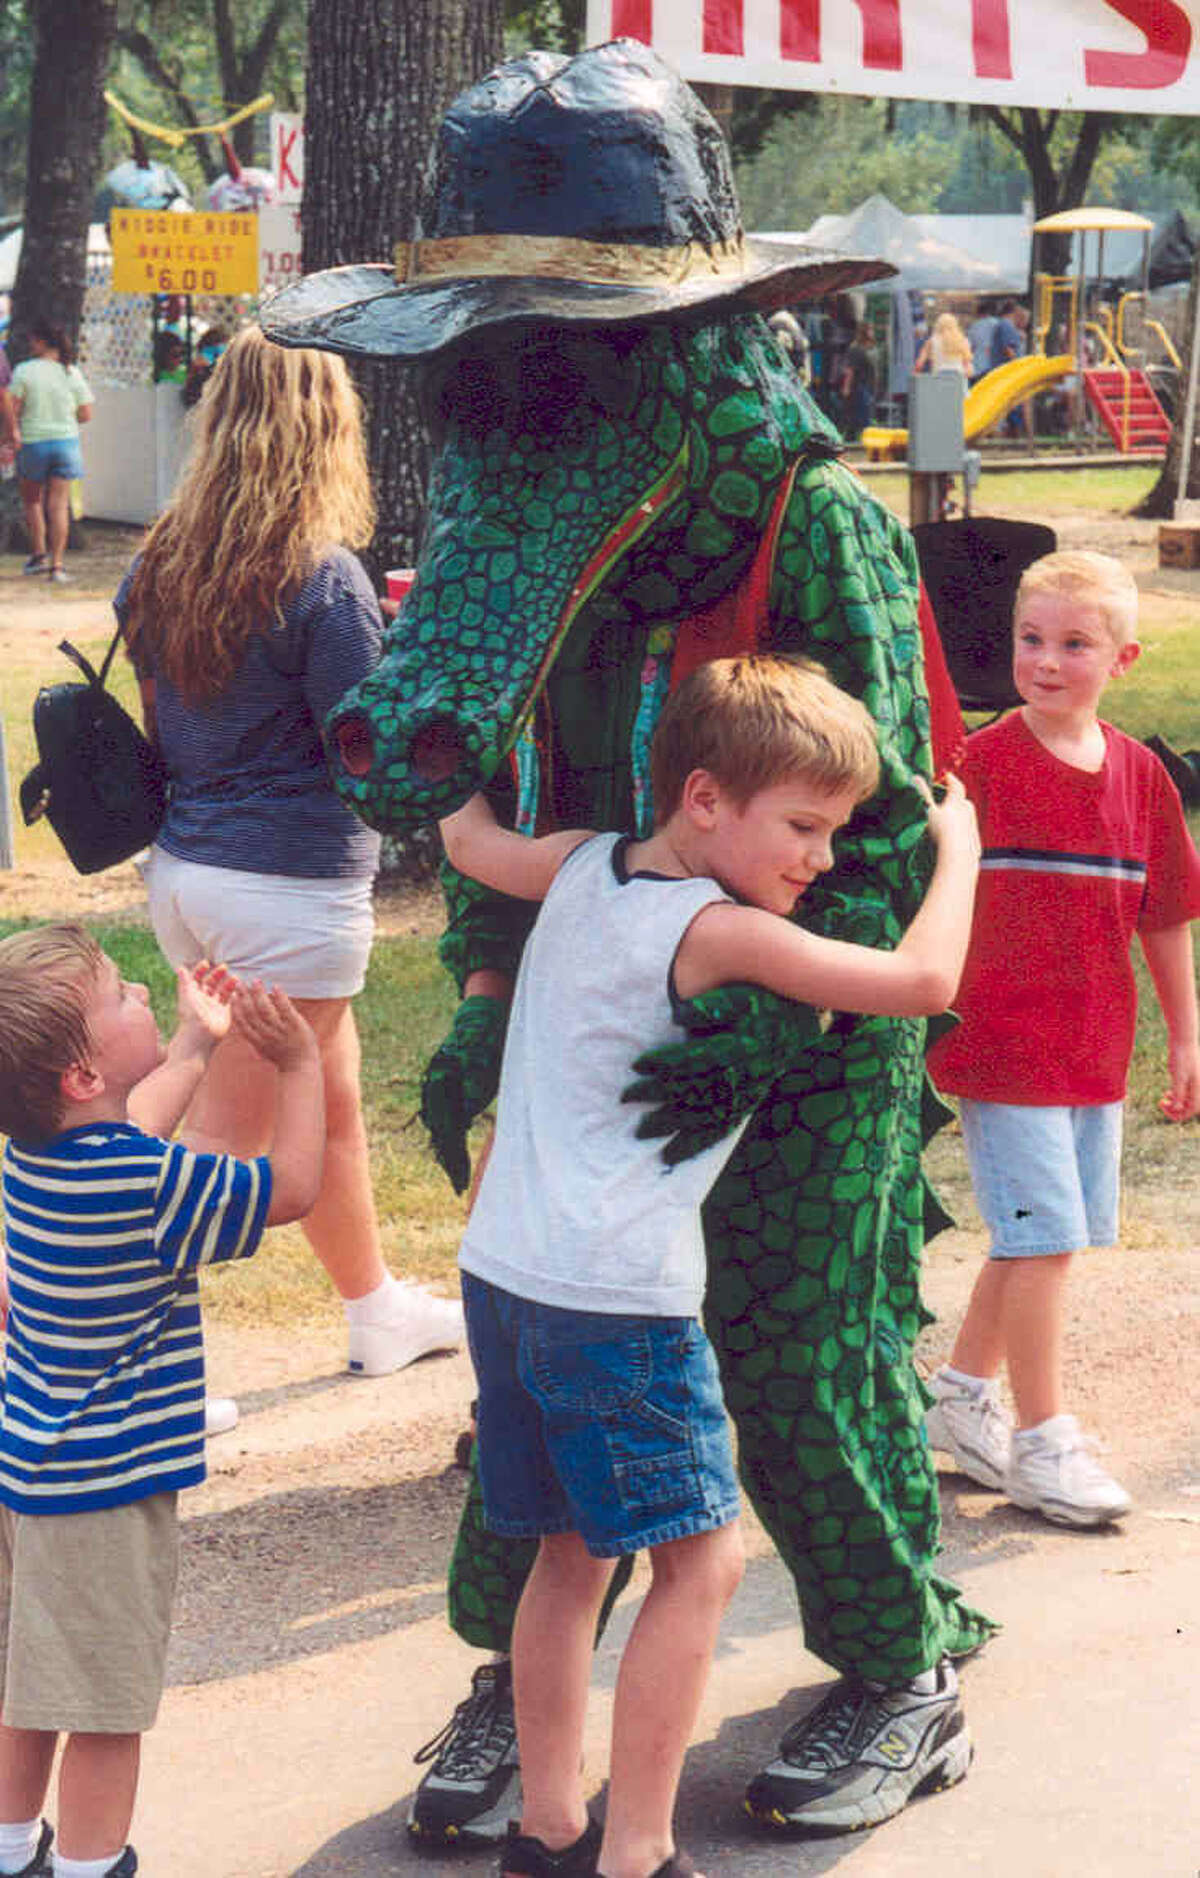 ﻿Show your love for alligators (although we don't recommend hugging a real one) at Texas Gatorfest in Anahuac.